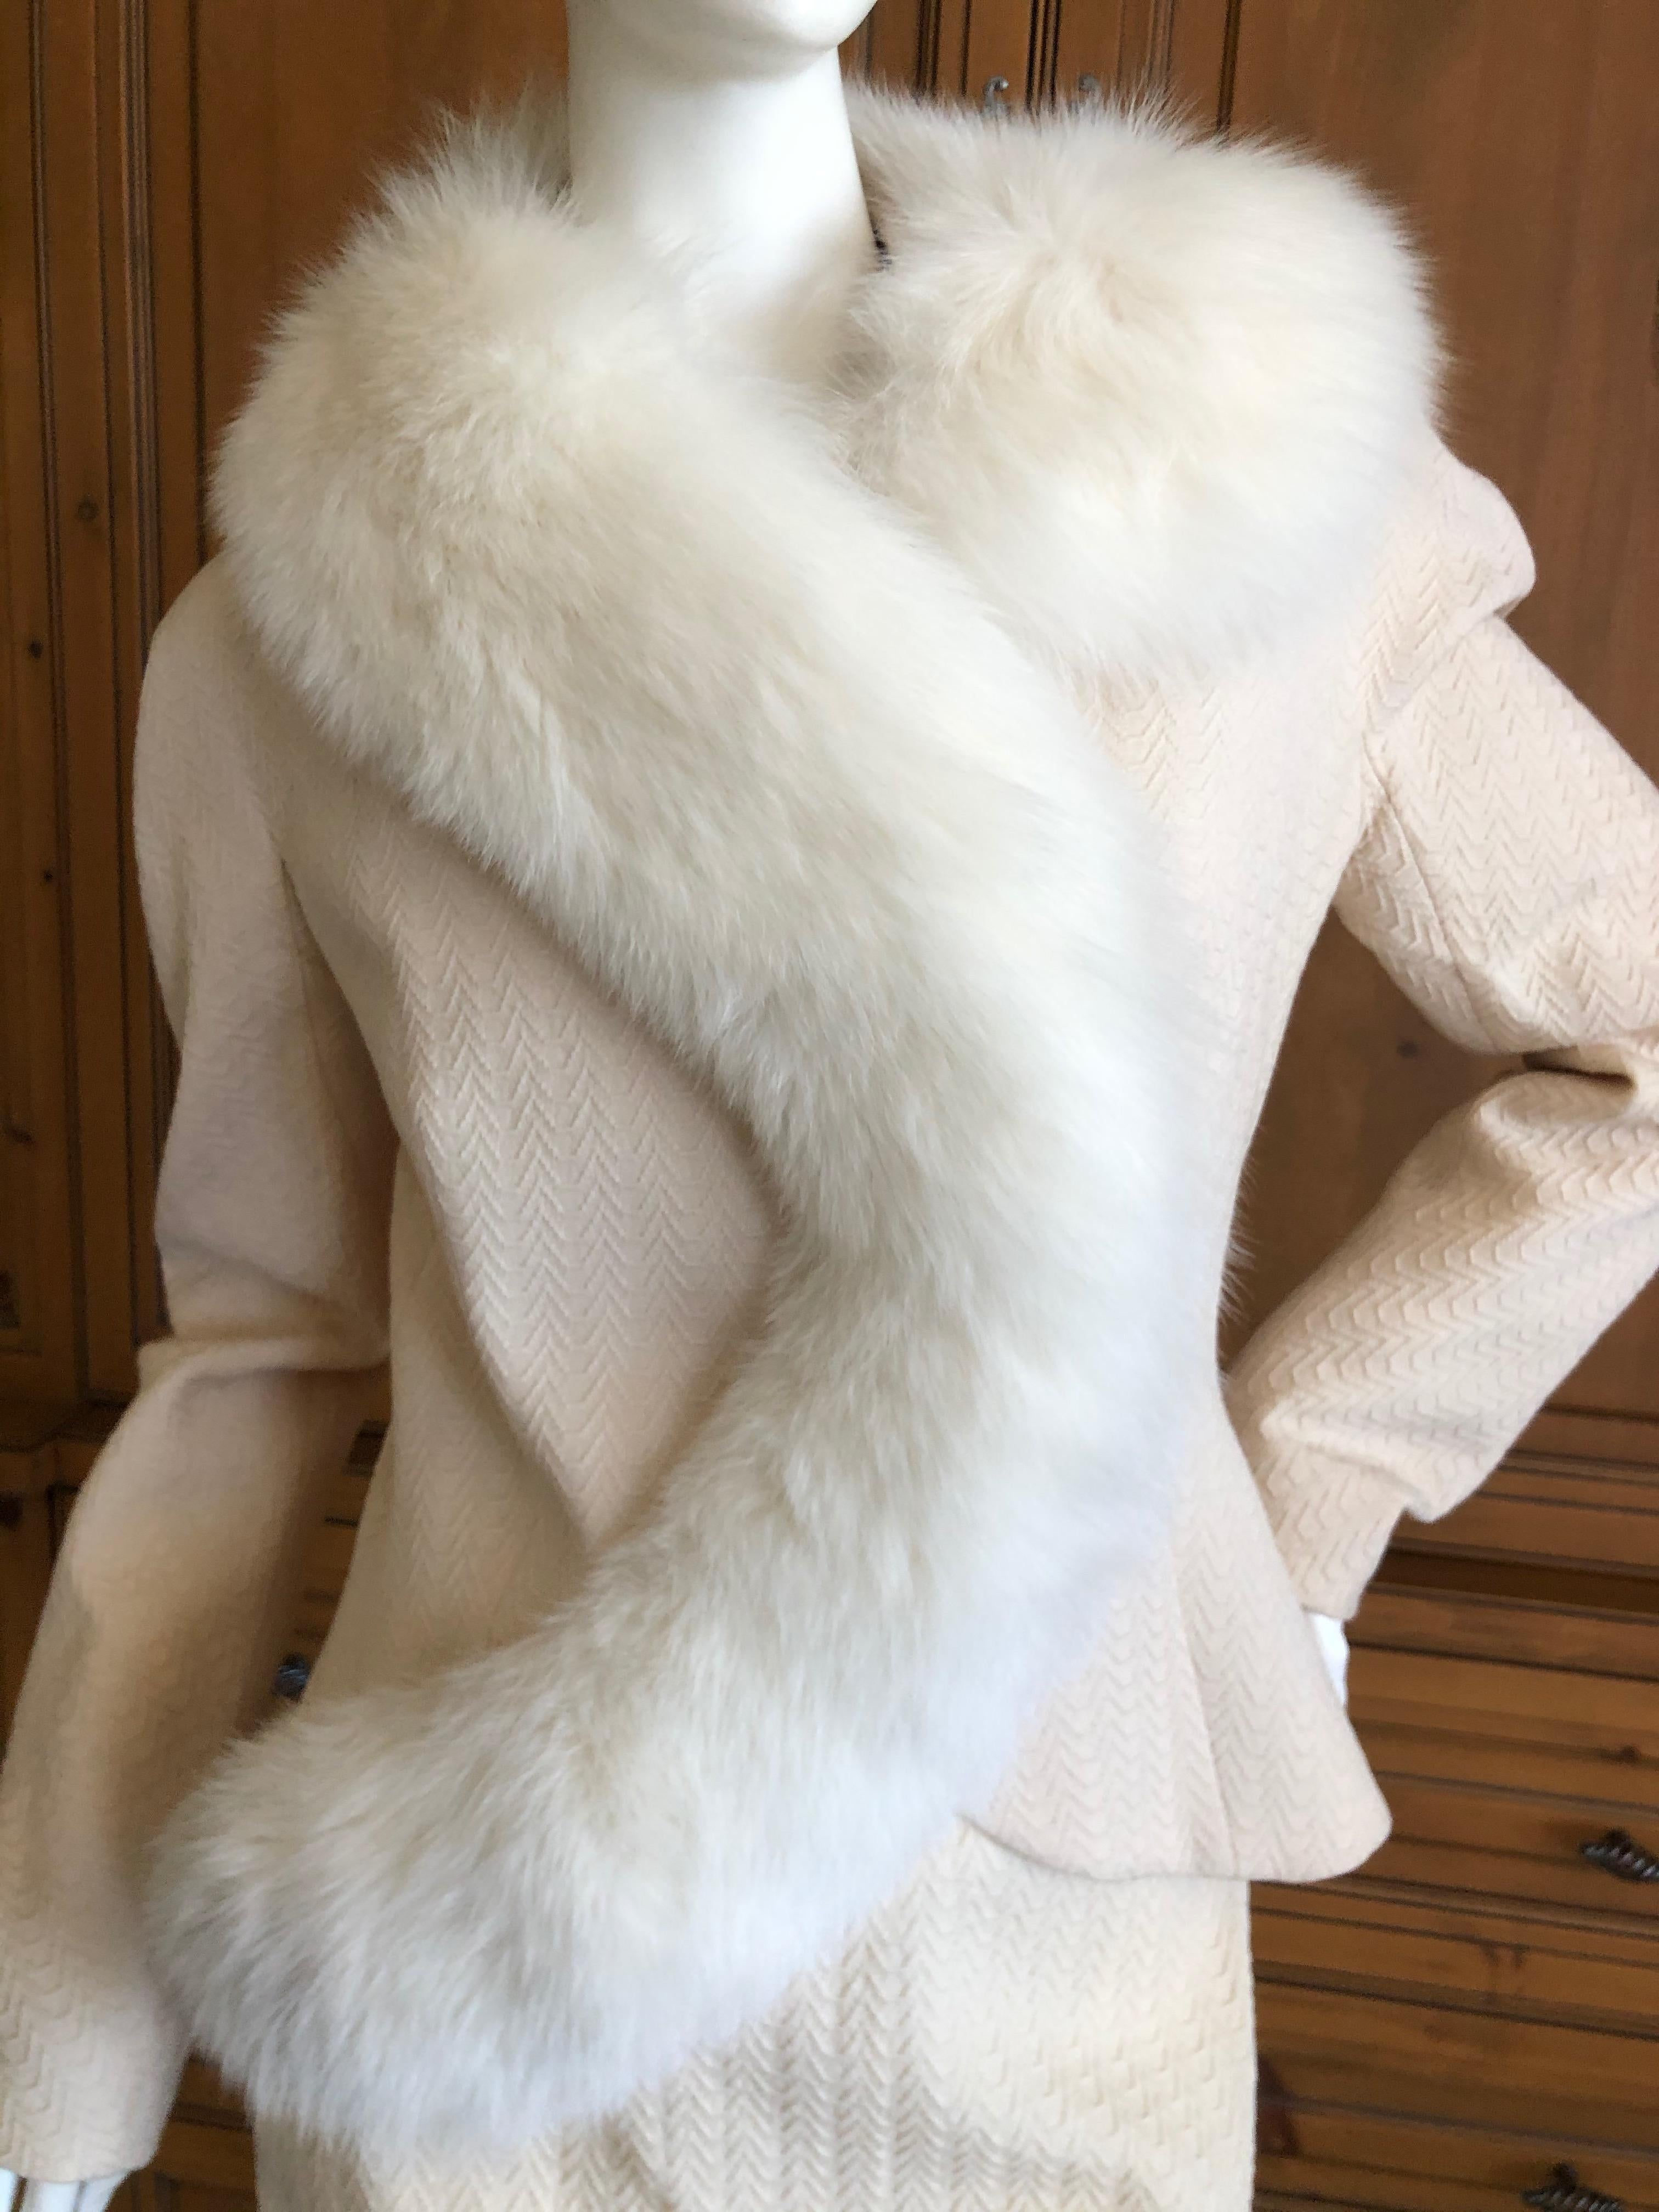  Christian Dior AW '97 by John Galliano Vintage Fox Fur Trim Jacket & Skirt Suit For Sale 1